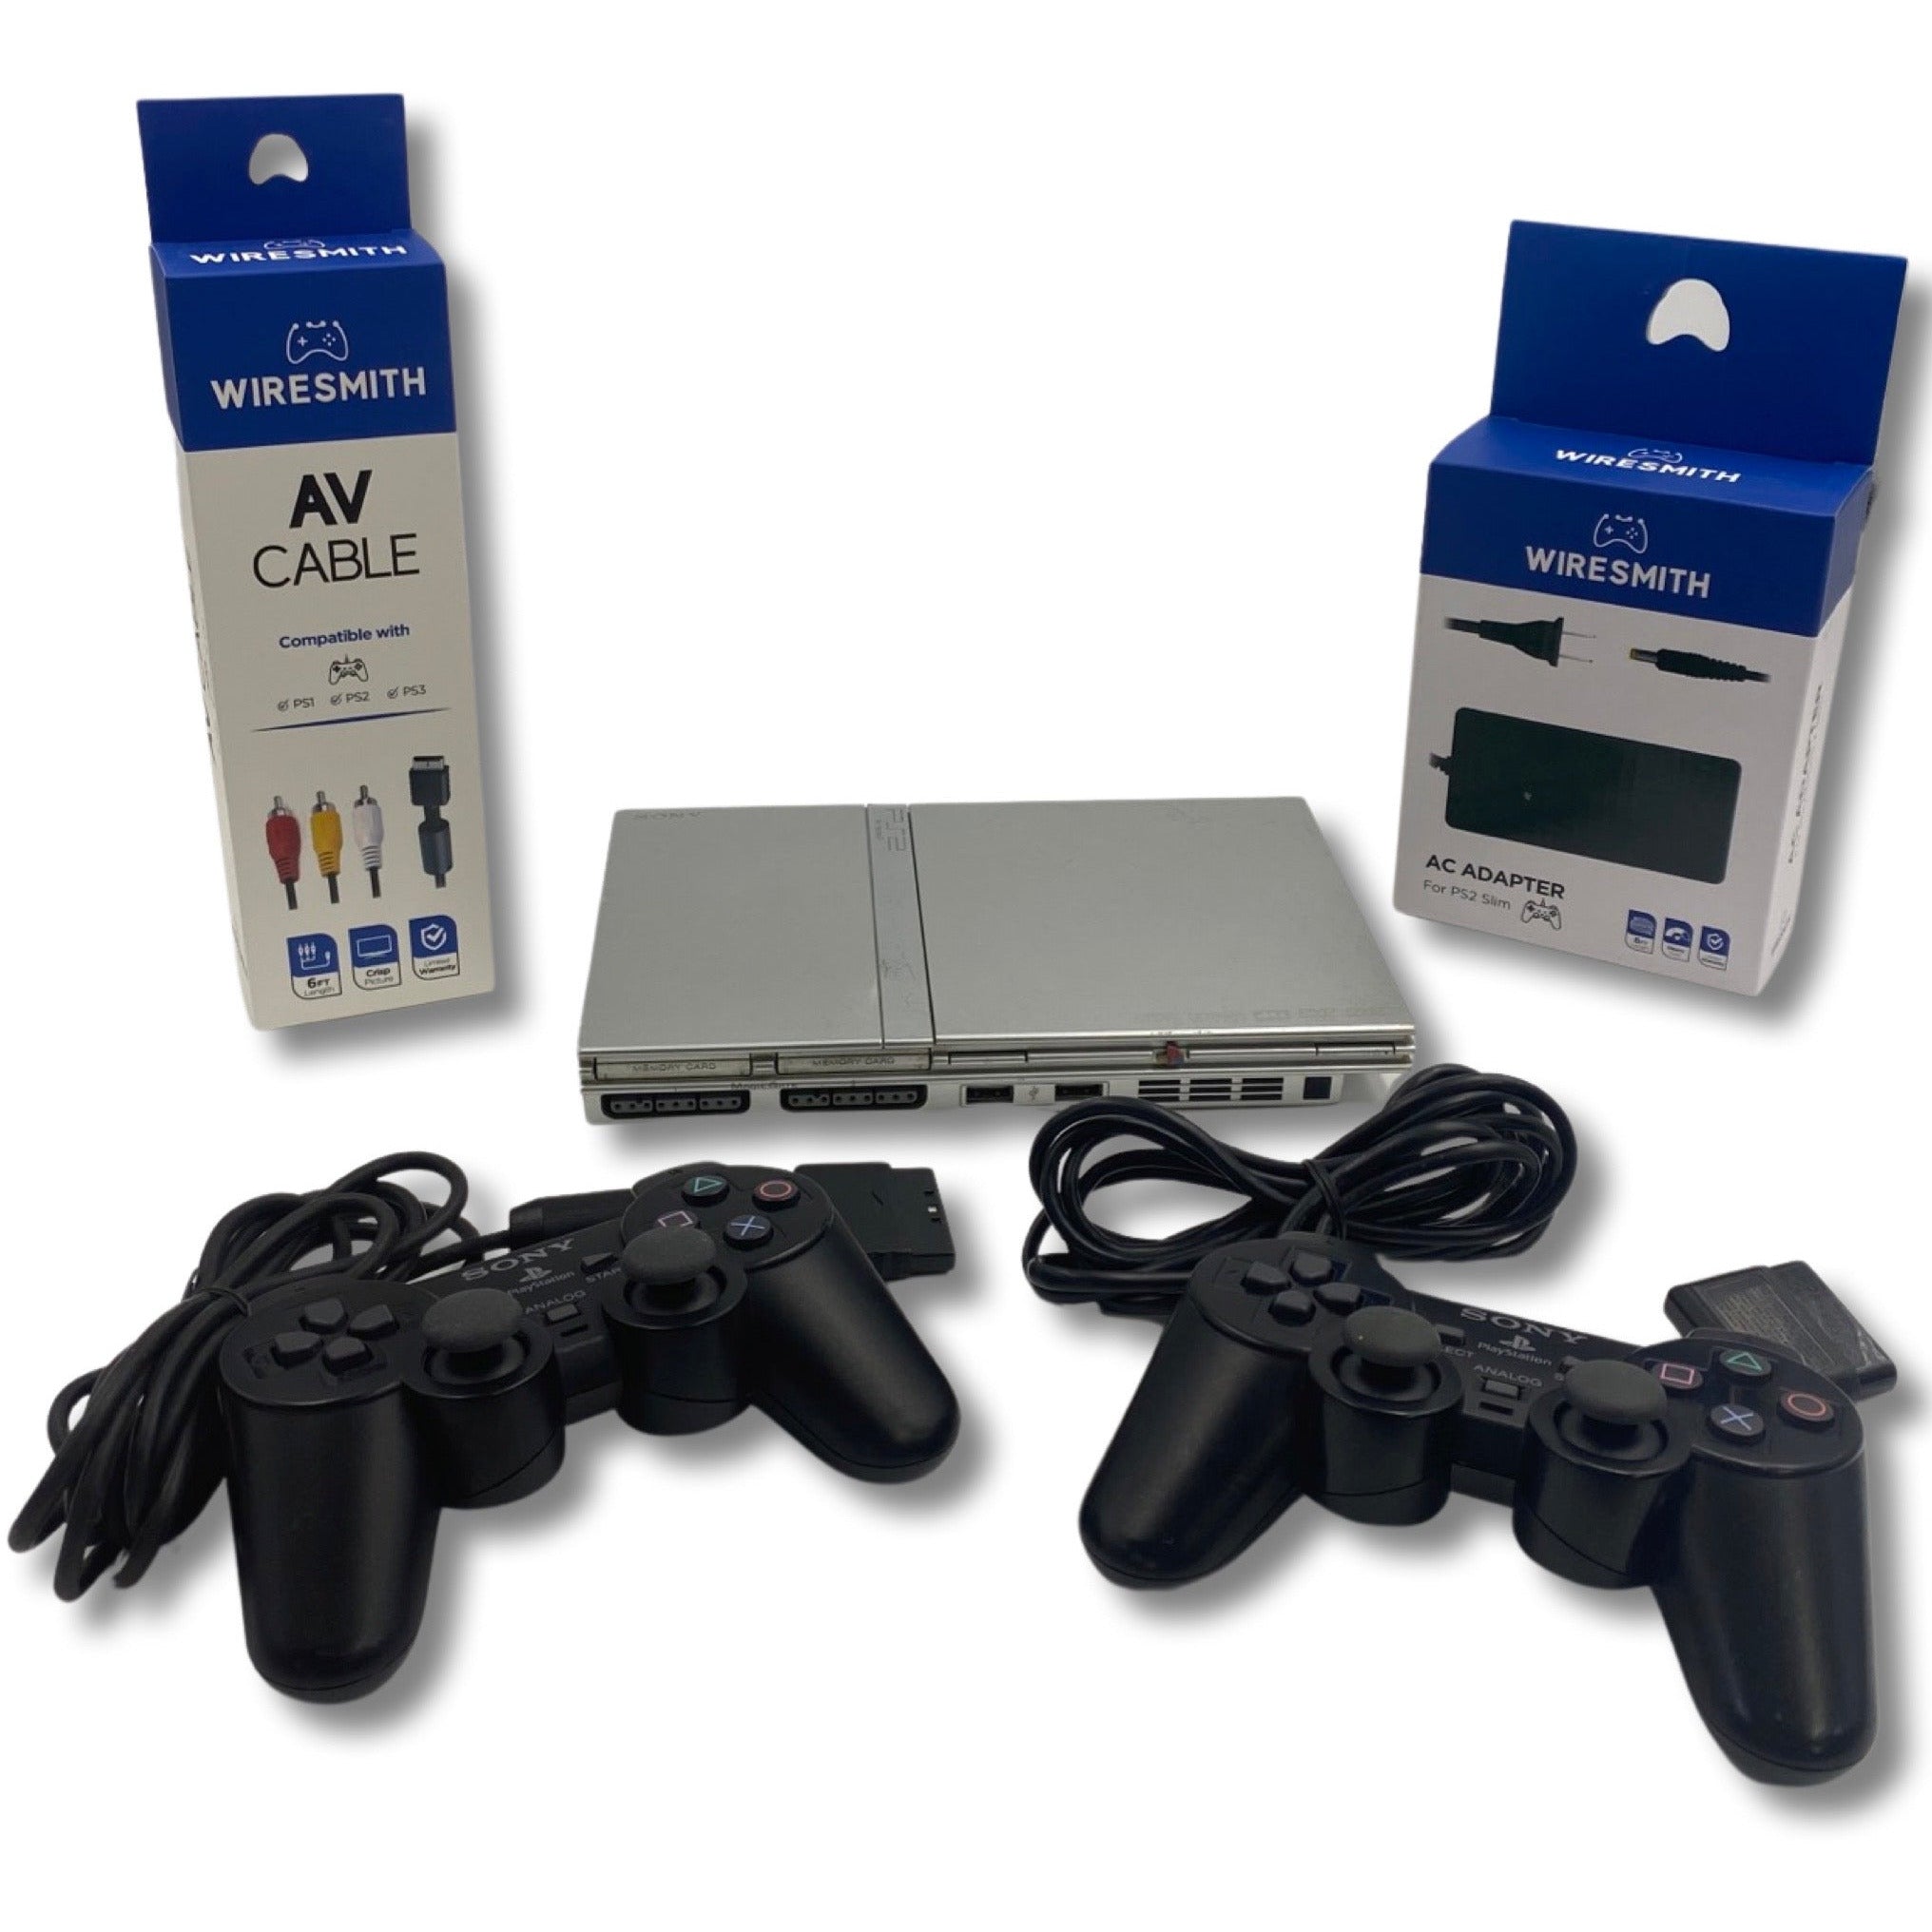 Silver Slim PlayStation 2 (Console w/ 2-Controllers), $171.99, Best Retro Video  Game & Toy Deals